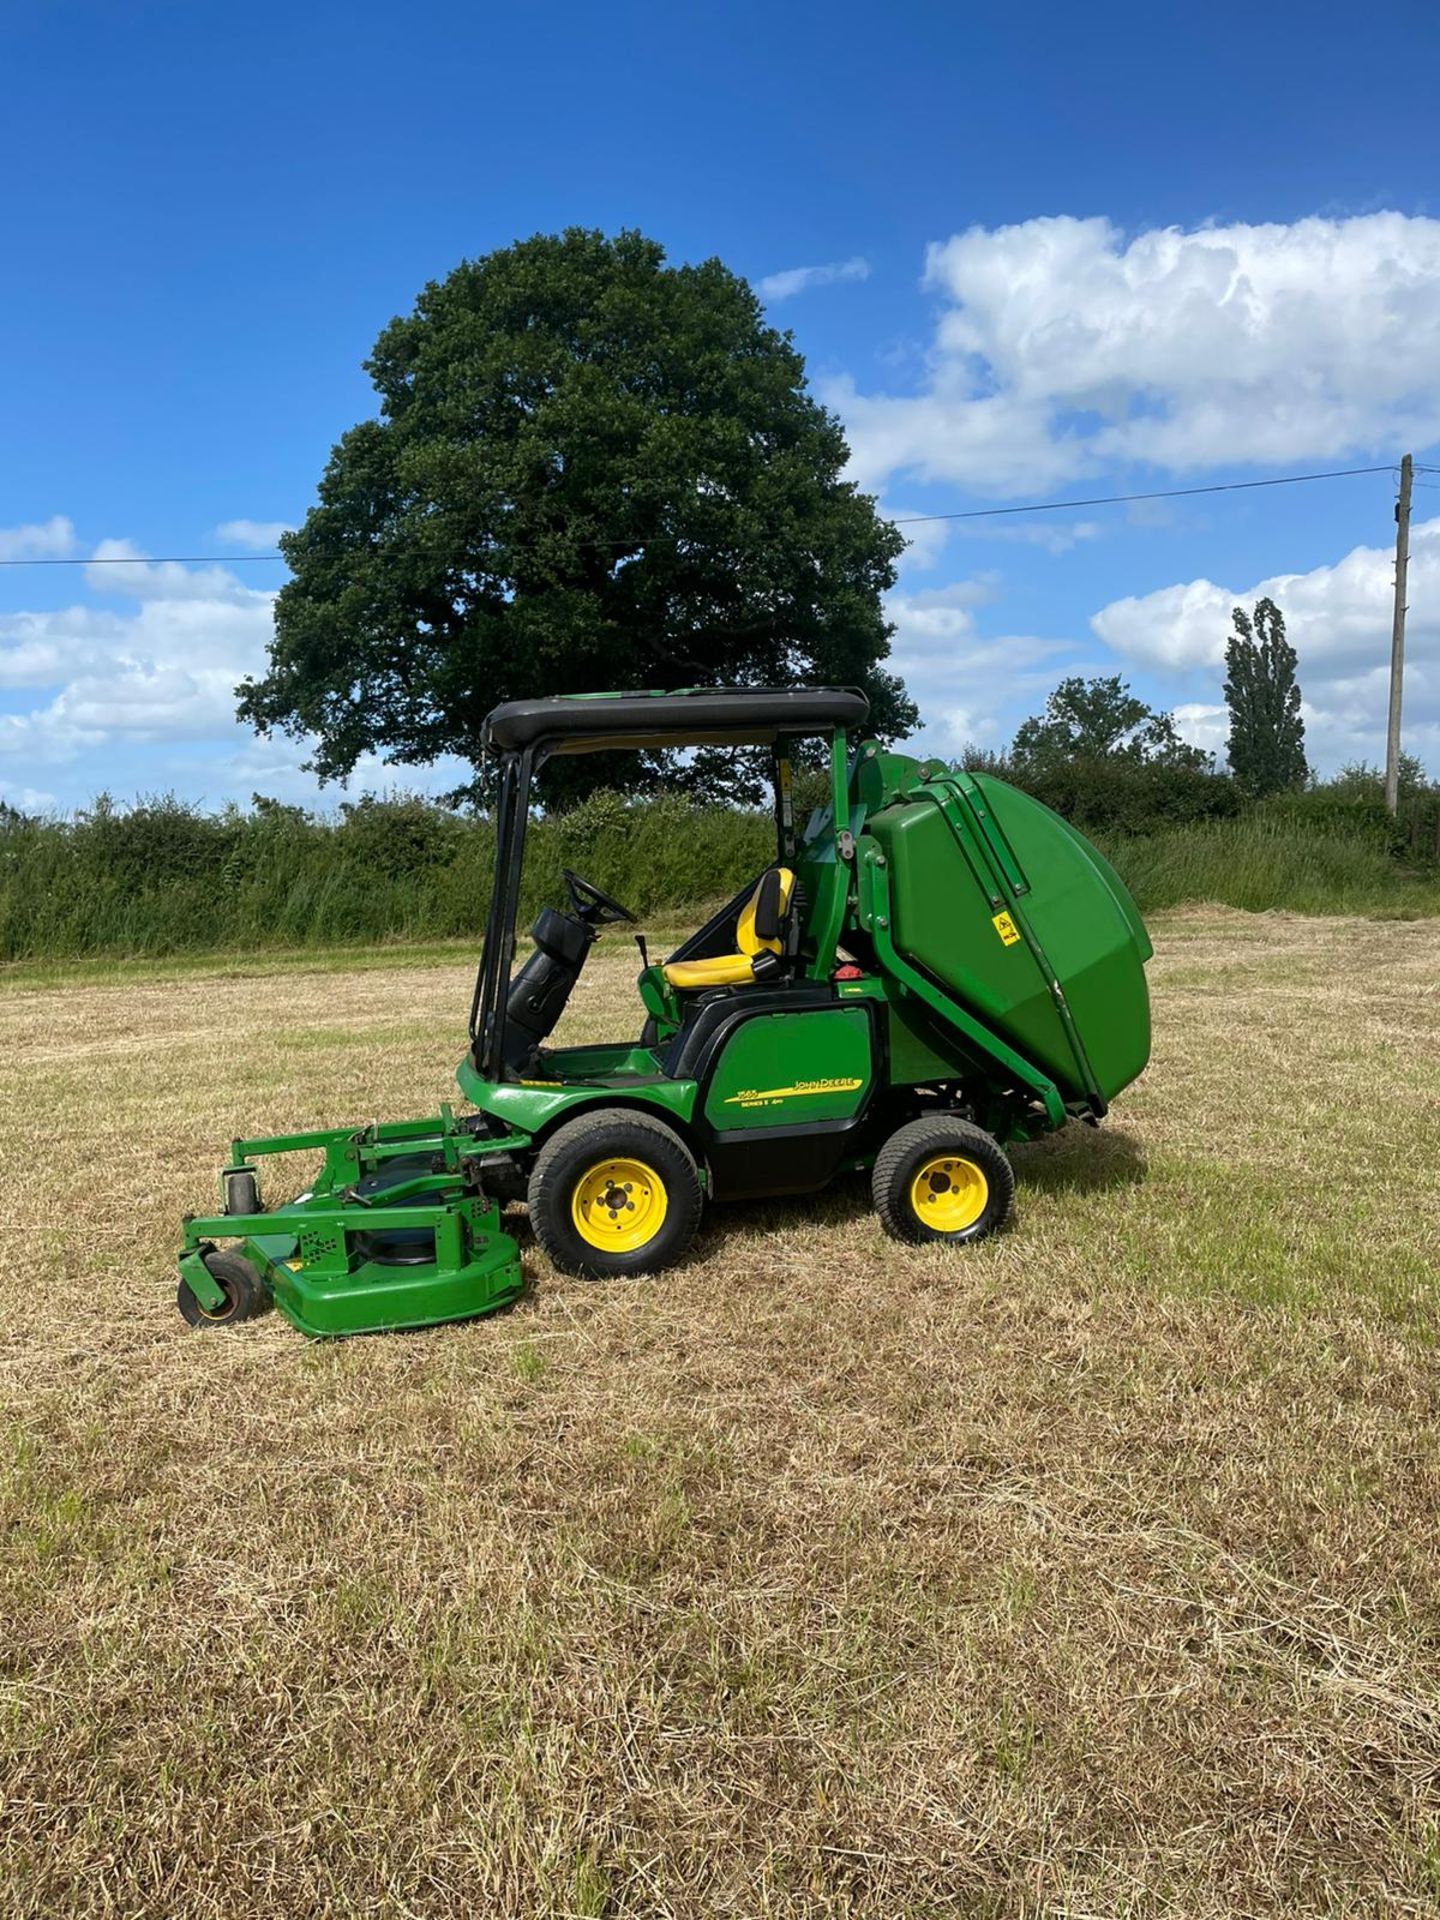 JOHN DEERE 1565 SERIES 2 RIDE ON LAWN MOWER WITH CLAMSHELL COLLECTOR *NO VAT* - Image 2 of 12